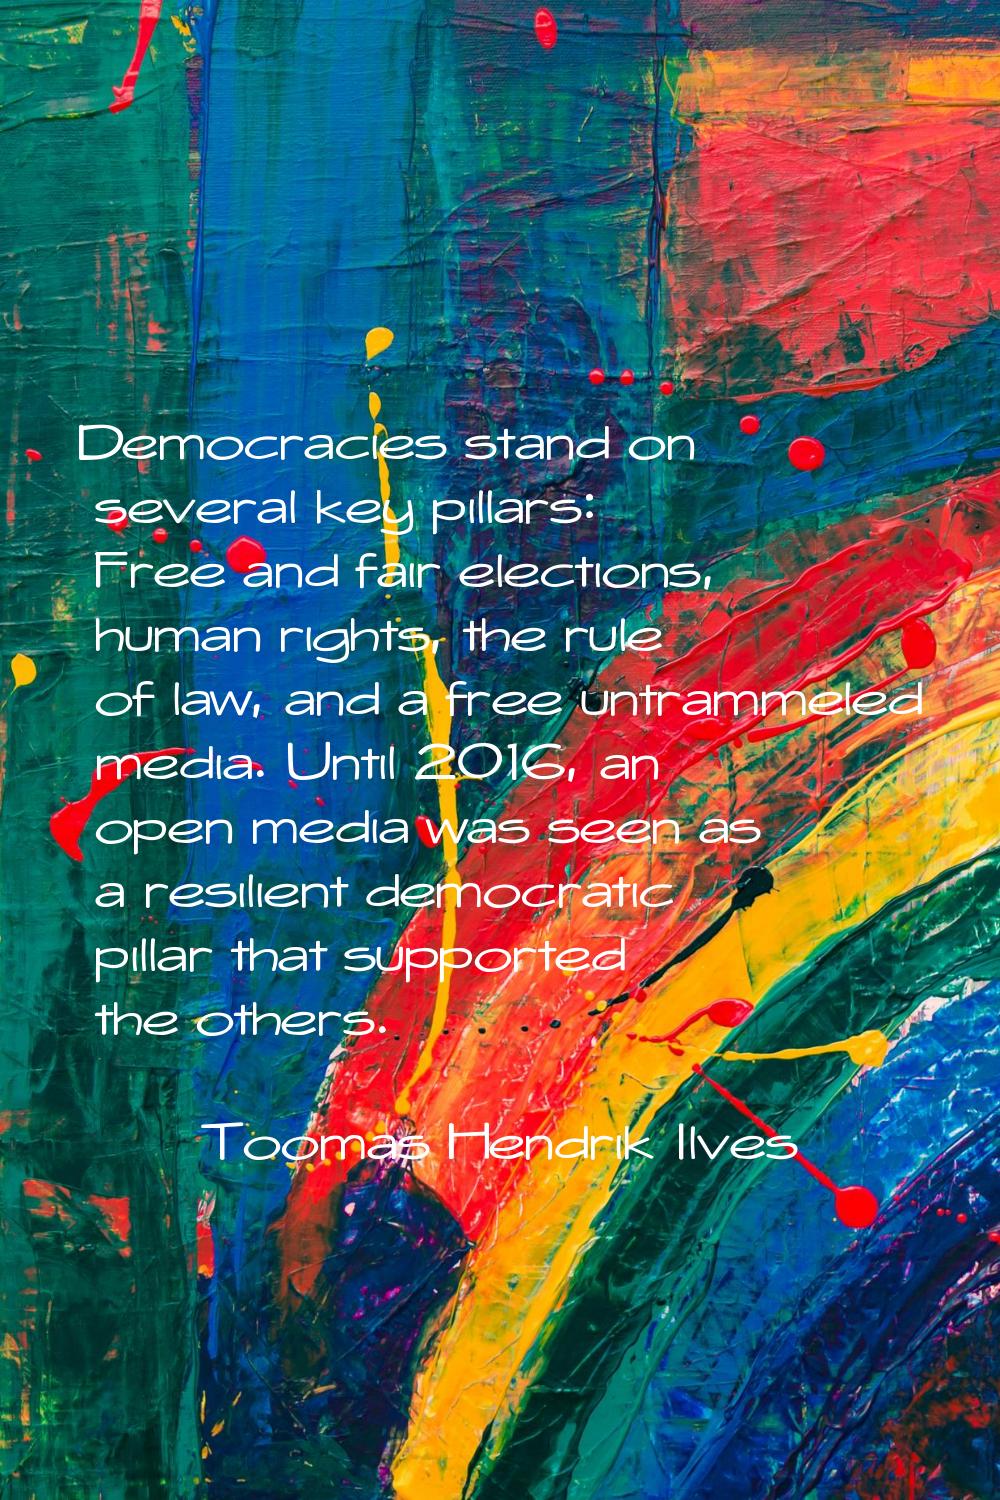 Democracies stand on several key pillars: Free and fair elections, human rights, the rule of law, a